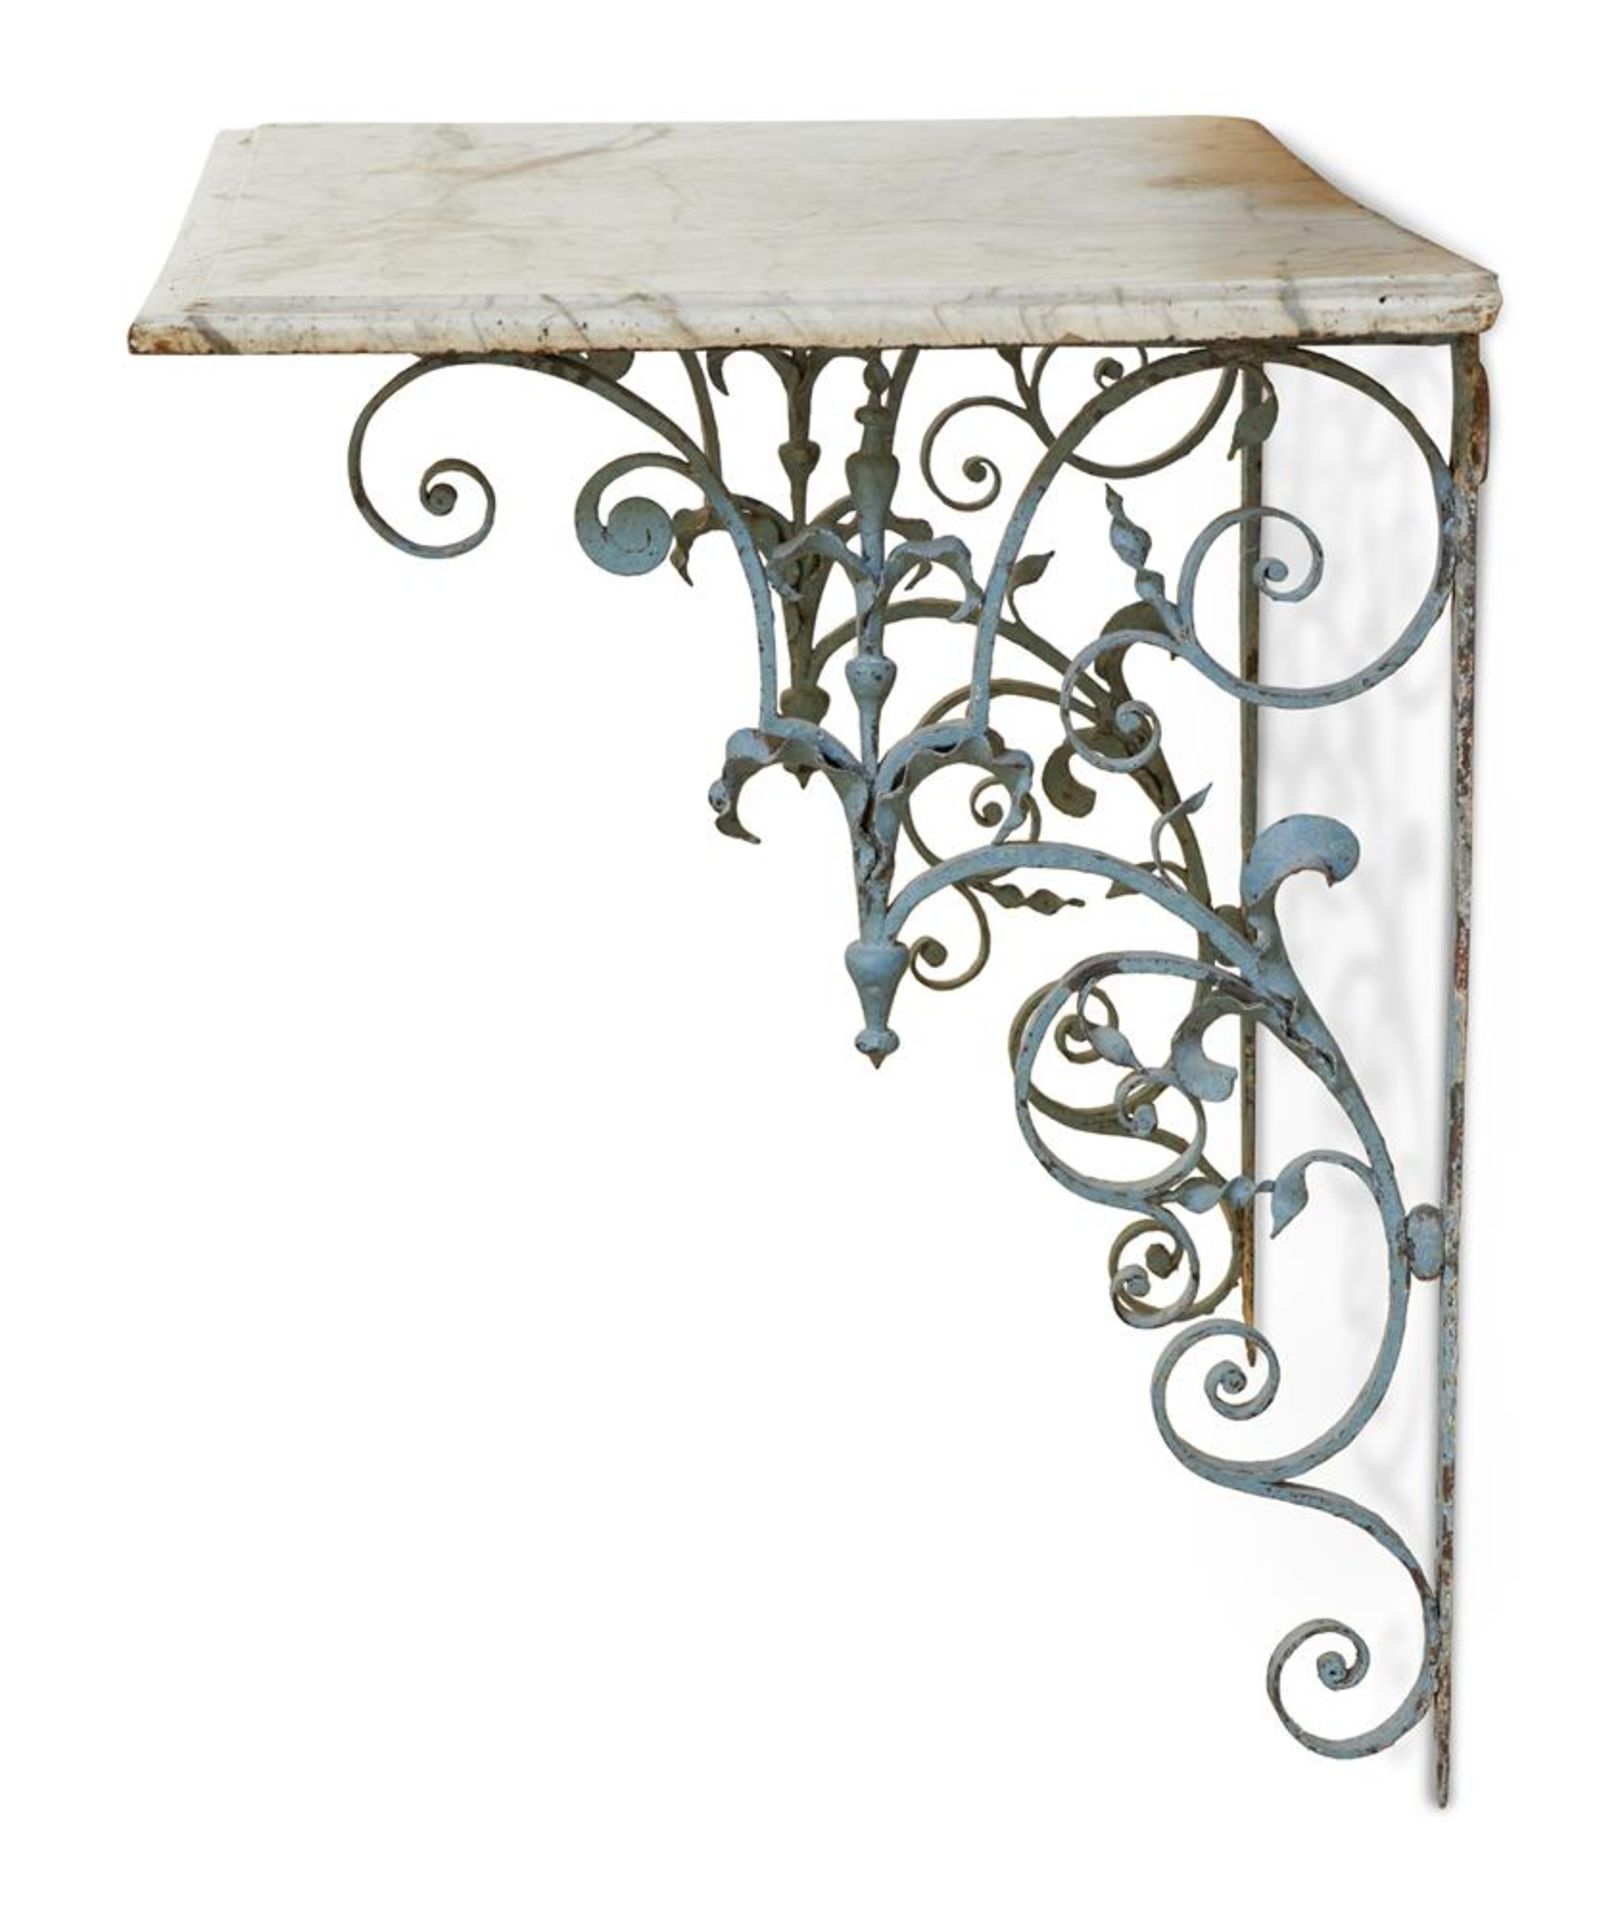 A GREY PAINTED WROUGHT IRON AND MARBLE CONSOLE TABLE, 19TH CENTURY - Image 4 of 5